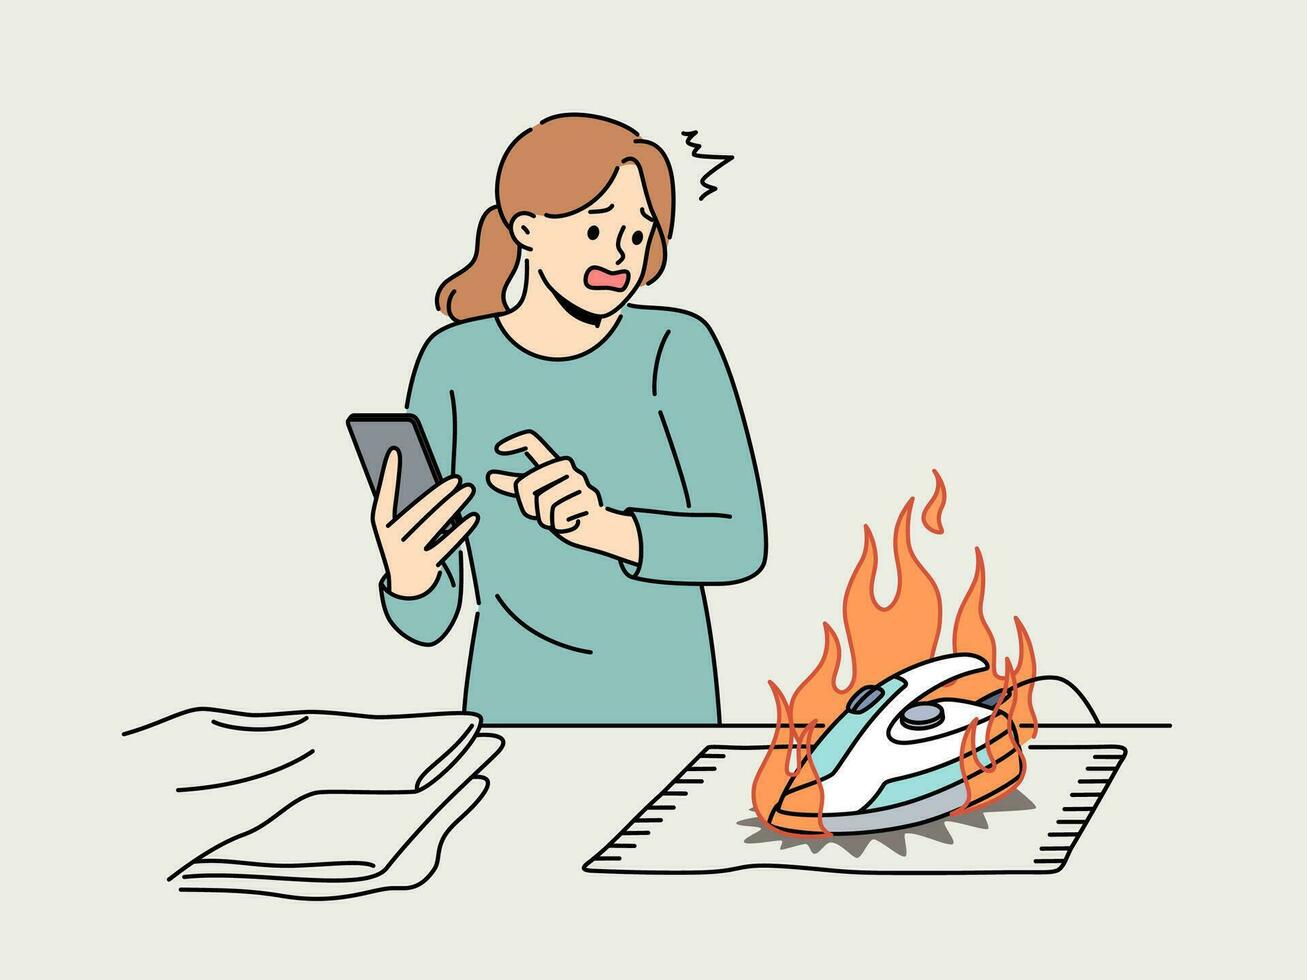 Distracted woman using cellphone burn clothes with iron. Scared housewife chatting on smartphone waste clothing with hot appliance. Vector illustration.